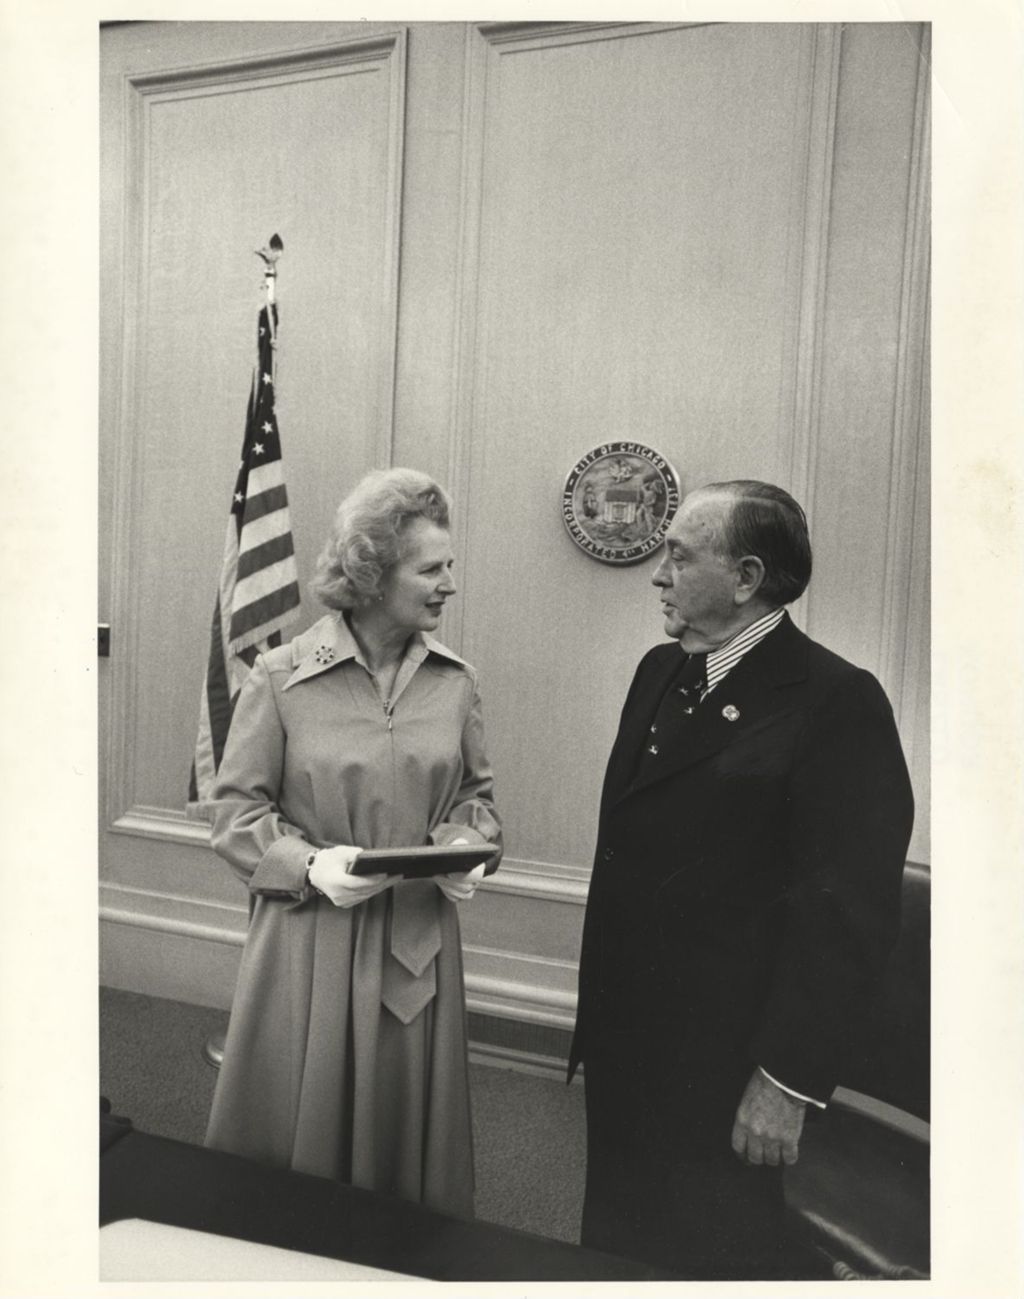 Miniature of Margaret Thatcher and Richard J. Daley